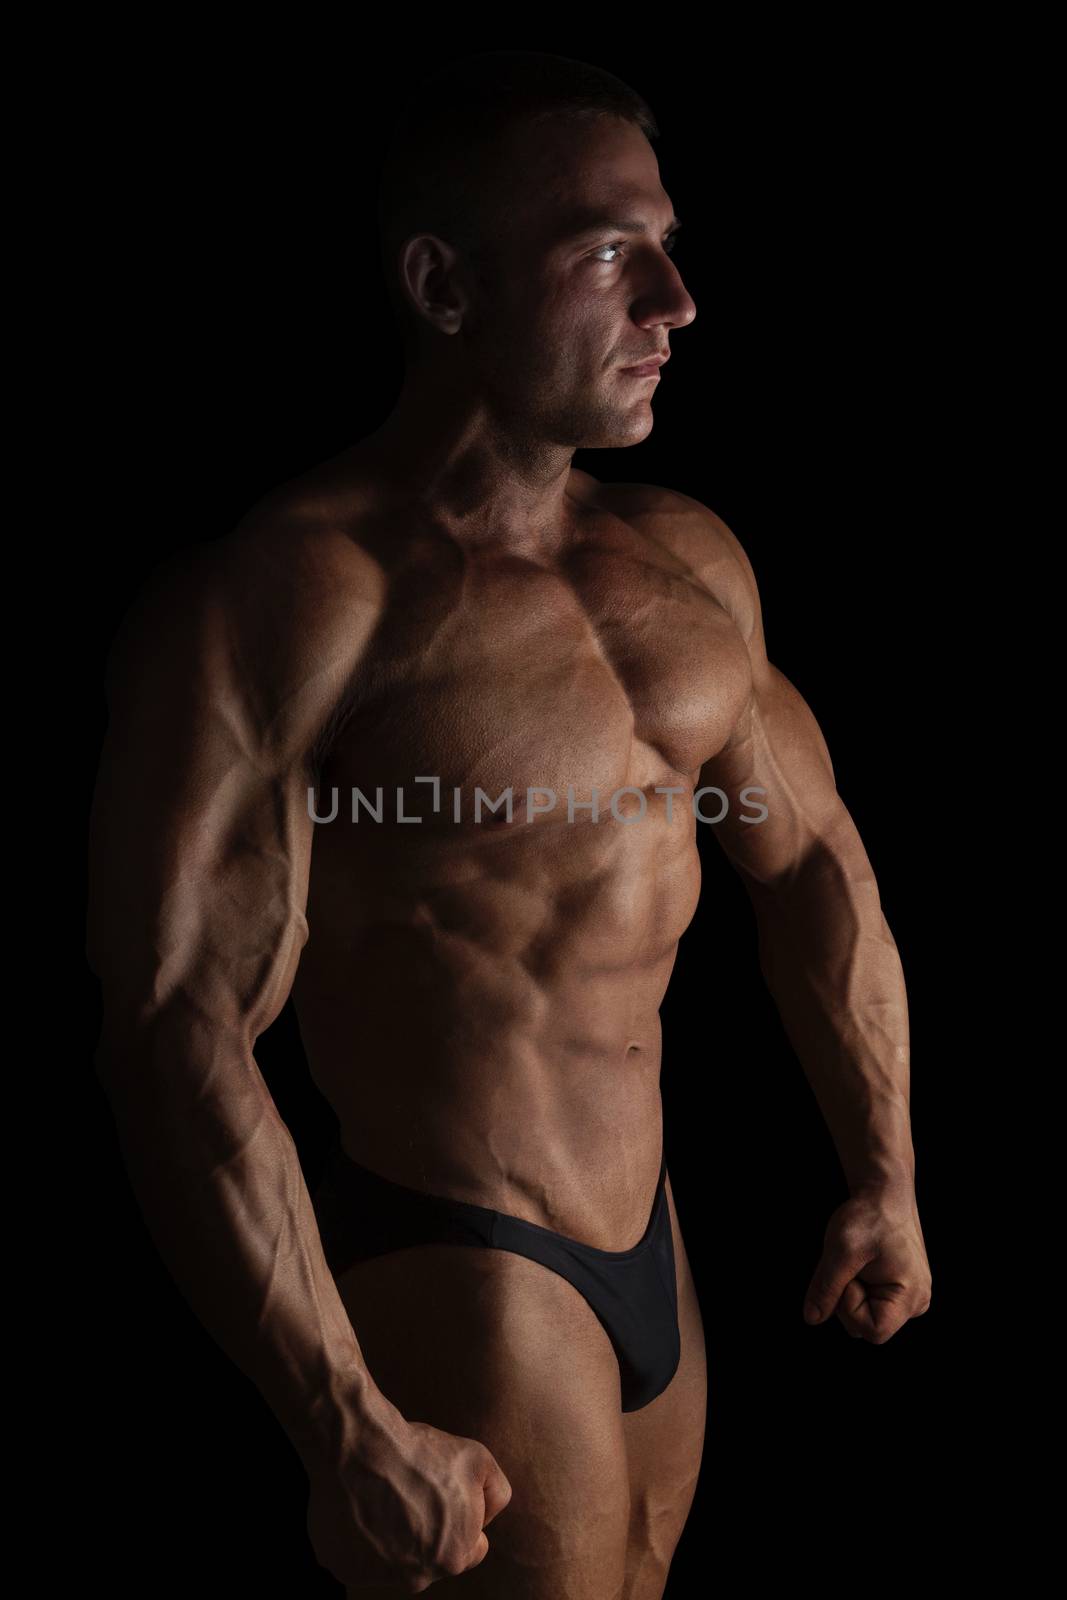 Sexy shirtless bodybuilder isolated on black background. Extreme strength, muscles and fitness.